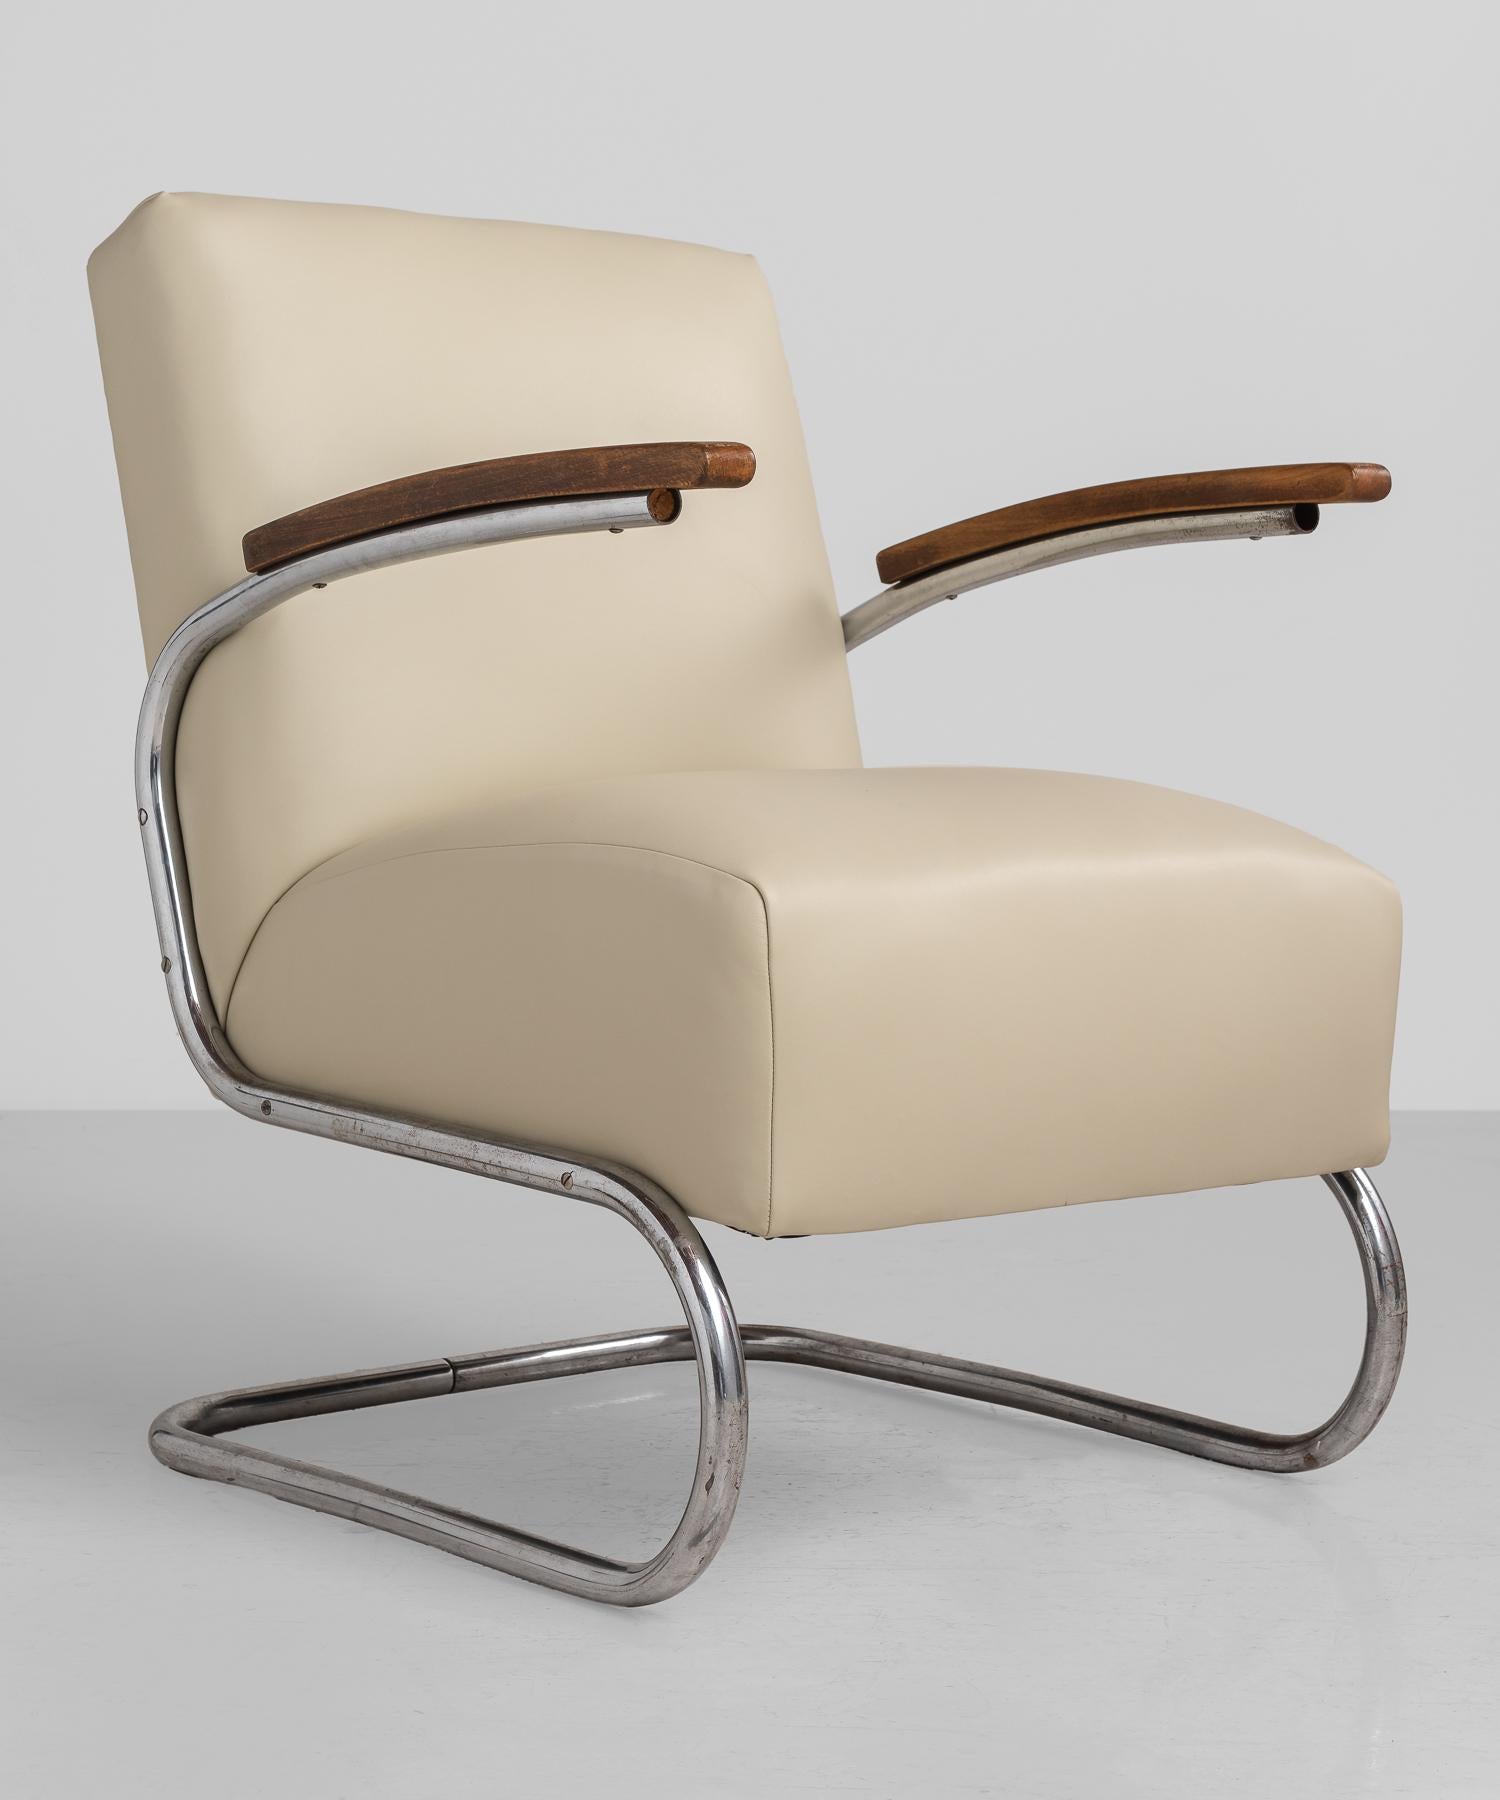 Thonet Modern Leather Armchair, Germany, circa 1930

Model SS41 Thonet armchair, newly reupholstered in Palomino leather by Maharam. Cantilever frame in chromed steel with wooden armrests.

Measures: 27.5